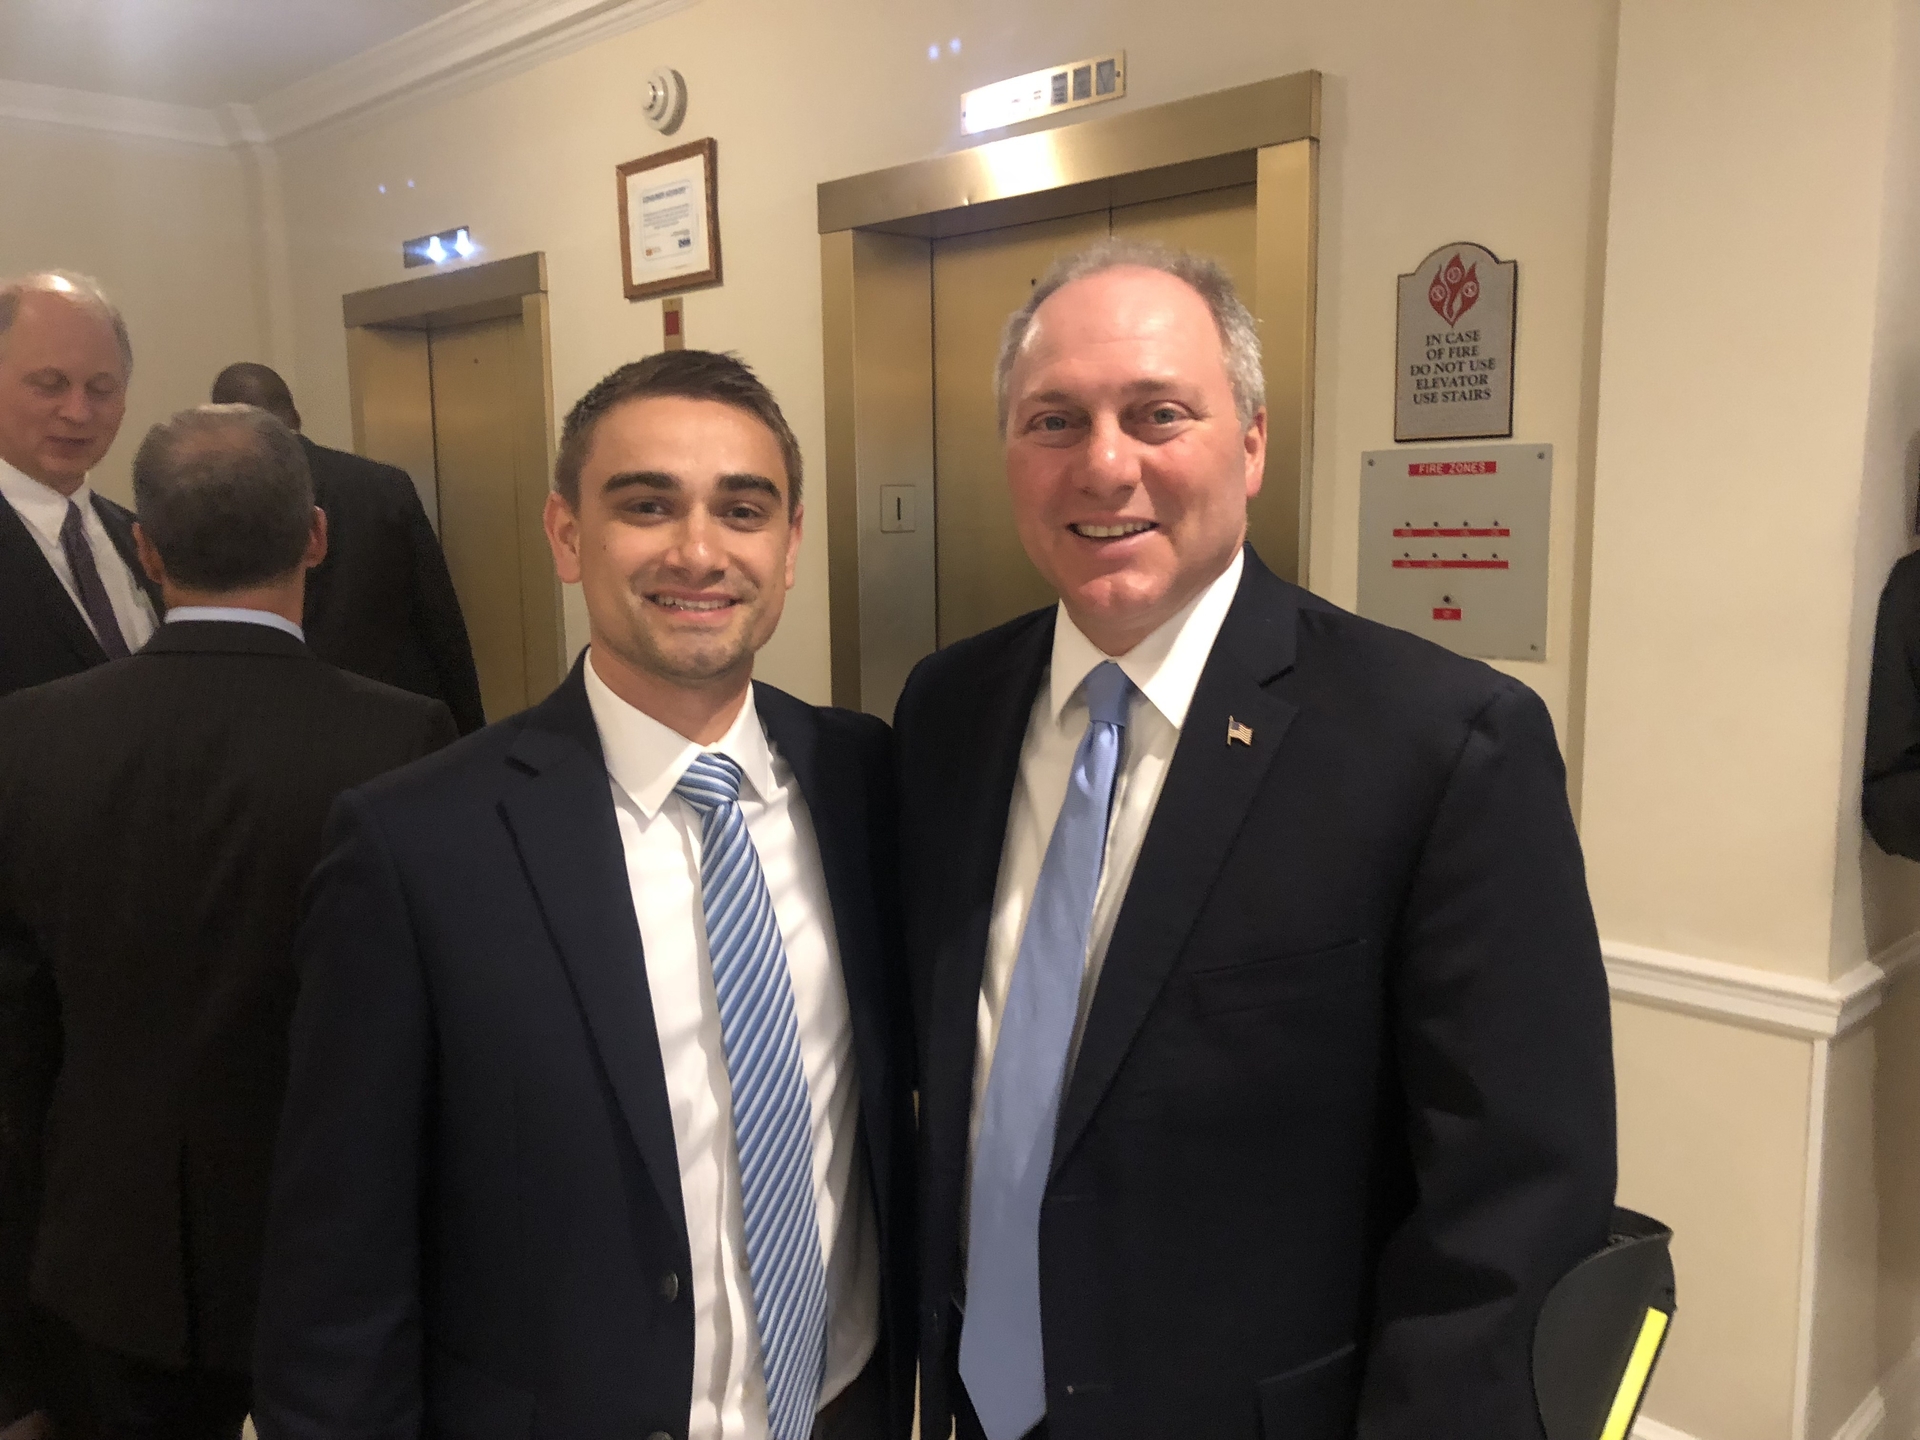 On the left, small business owner Tyler Lecompte, on the right, House Majority Whip Steve Scalise (R - Louisiana)